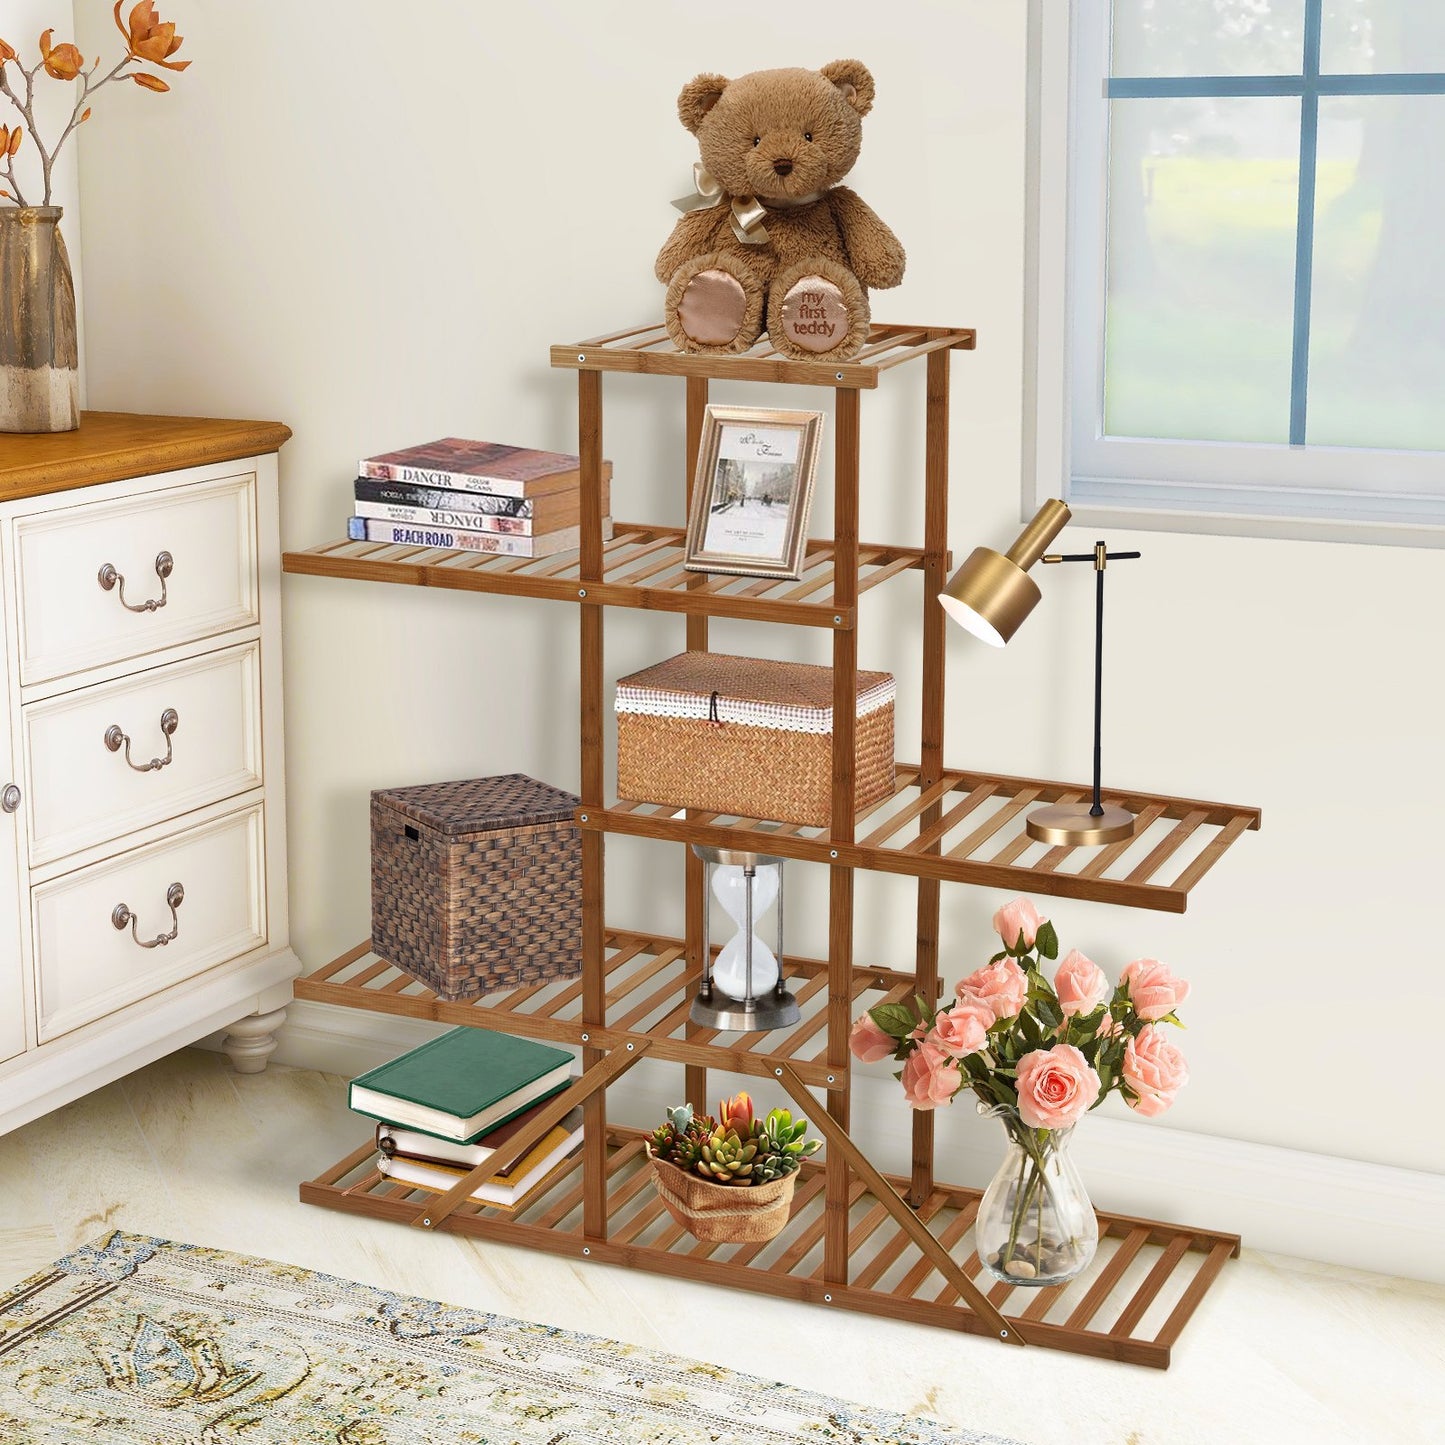 5-tier 10 Potted Bamboo Plant Stand, Brown